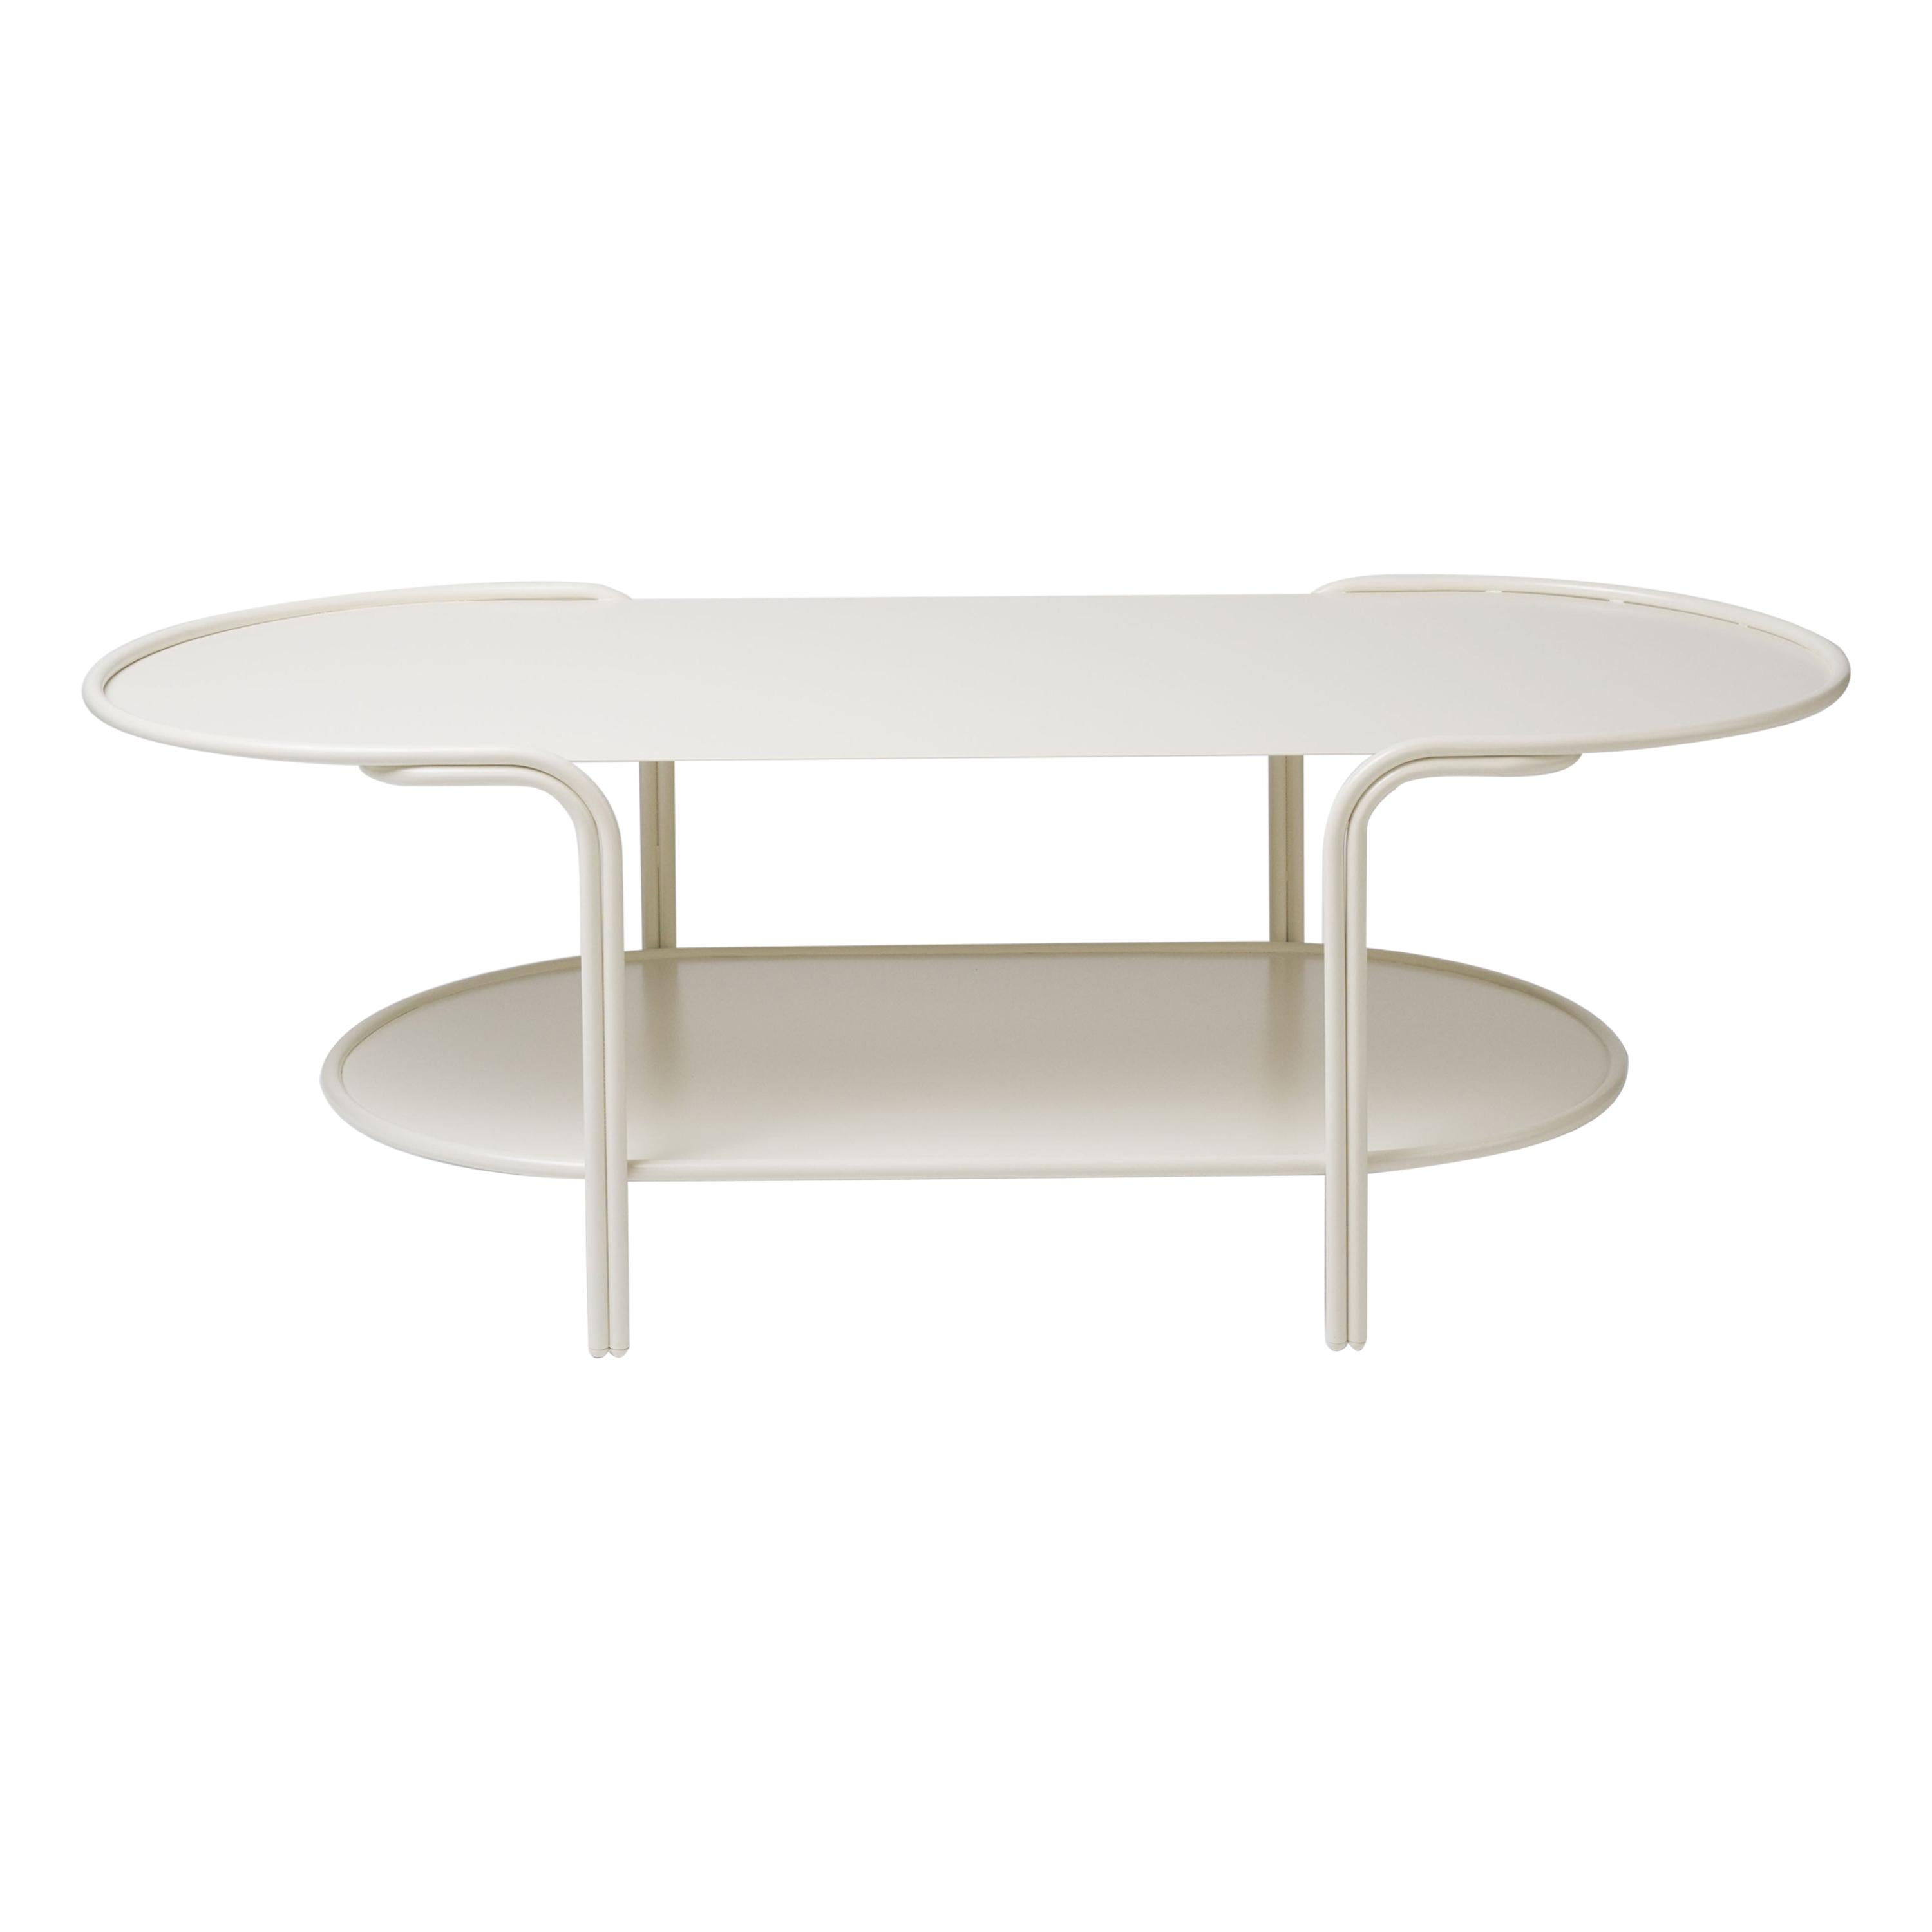 Tiered Outdoor Bancroft Coffee Table in Matte Cream Stainless Steel by Laun For Sale